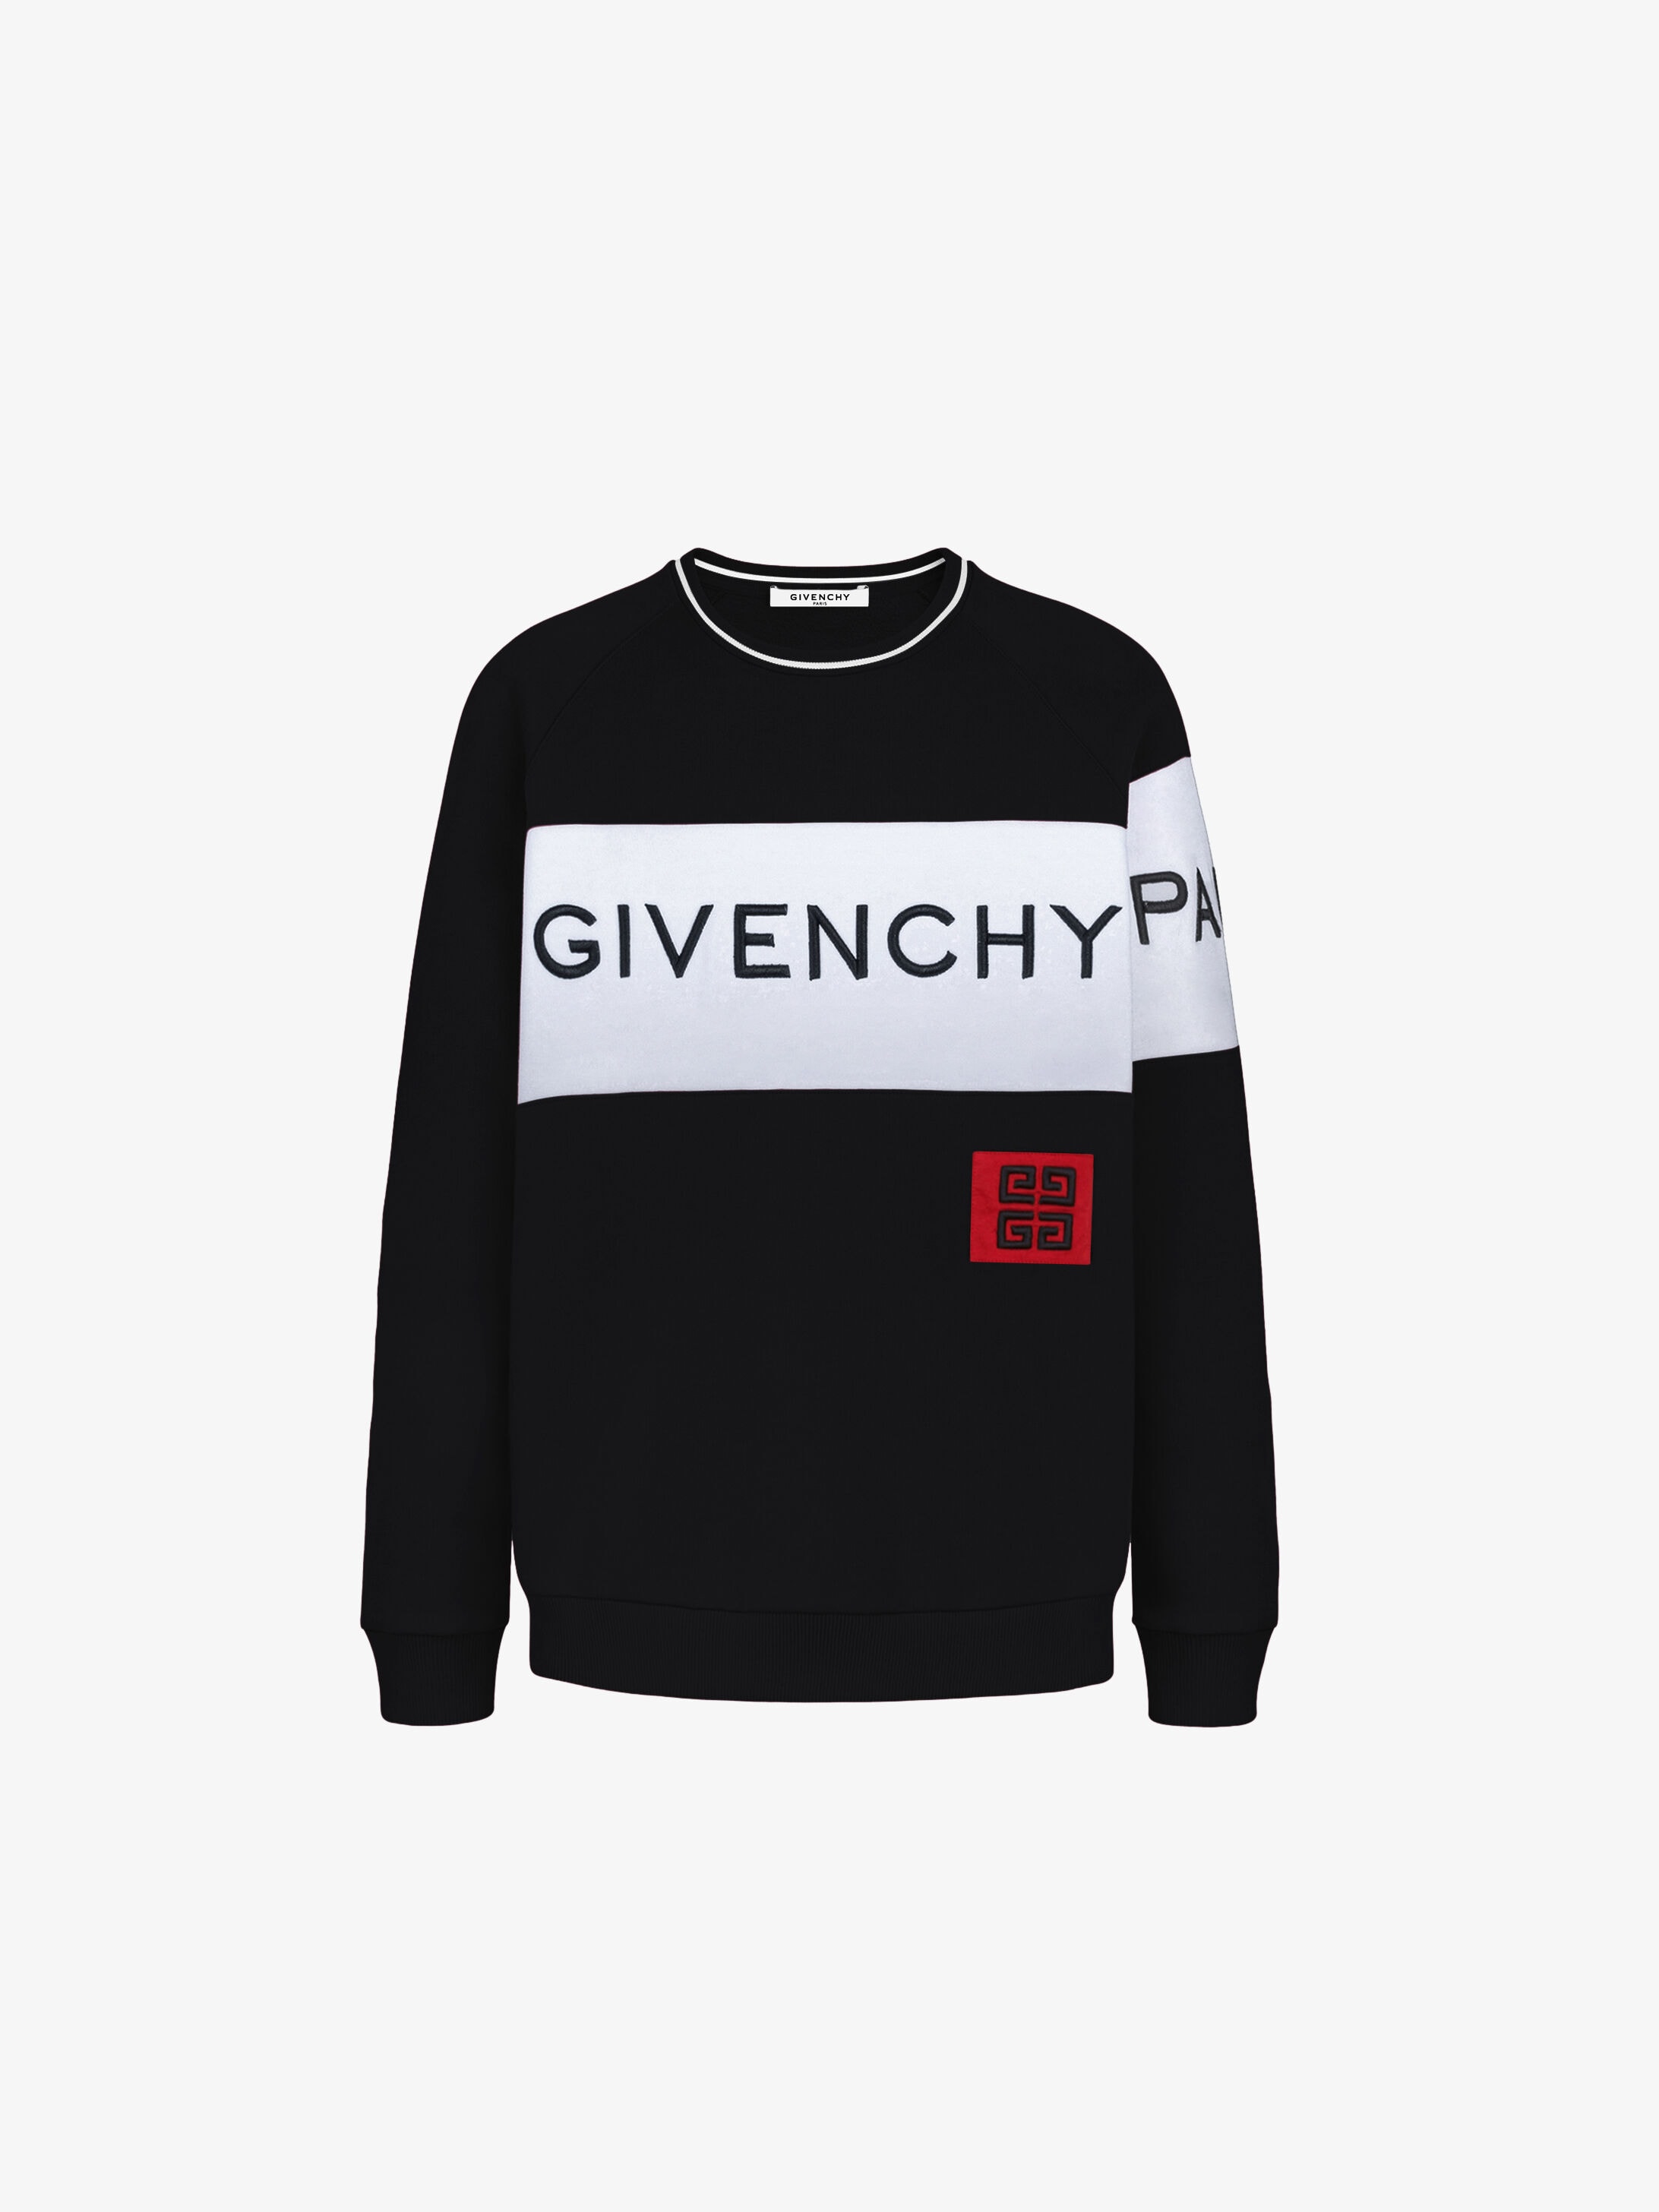 givenchy jumper womens